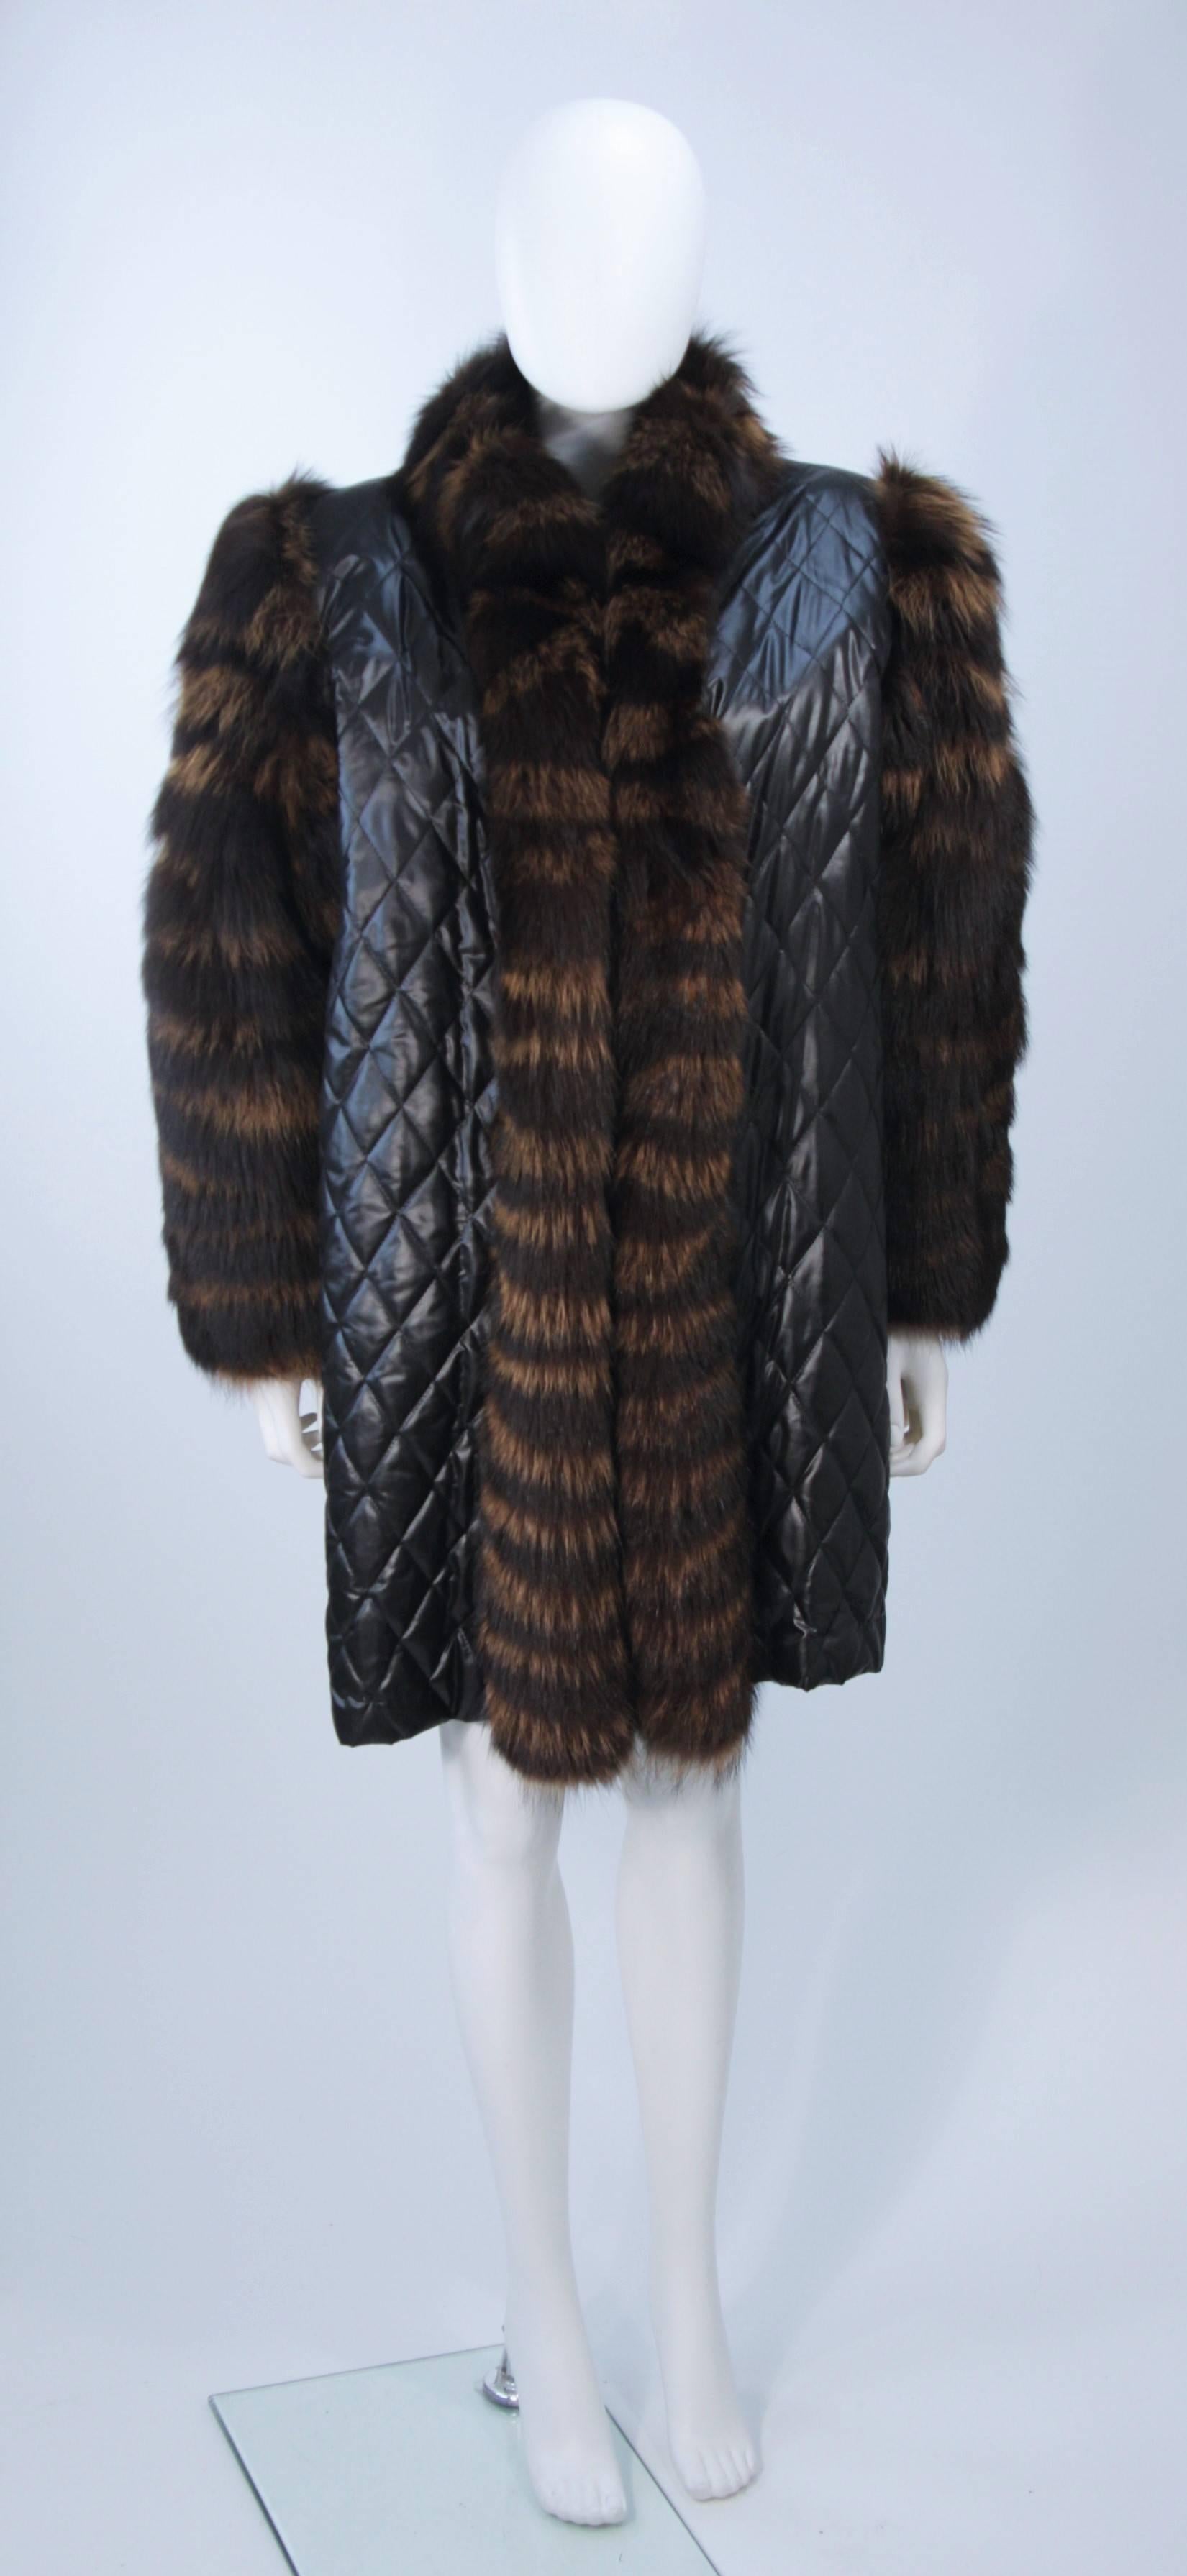 This Yves Saint Laurent Couture coat is composed of a supple quilted polyester in black with cognac/ brown hue fox fur trim and sleeves. Features sheared beaver lining and an open style design with pockets. In excellent vintage condition.